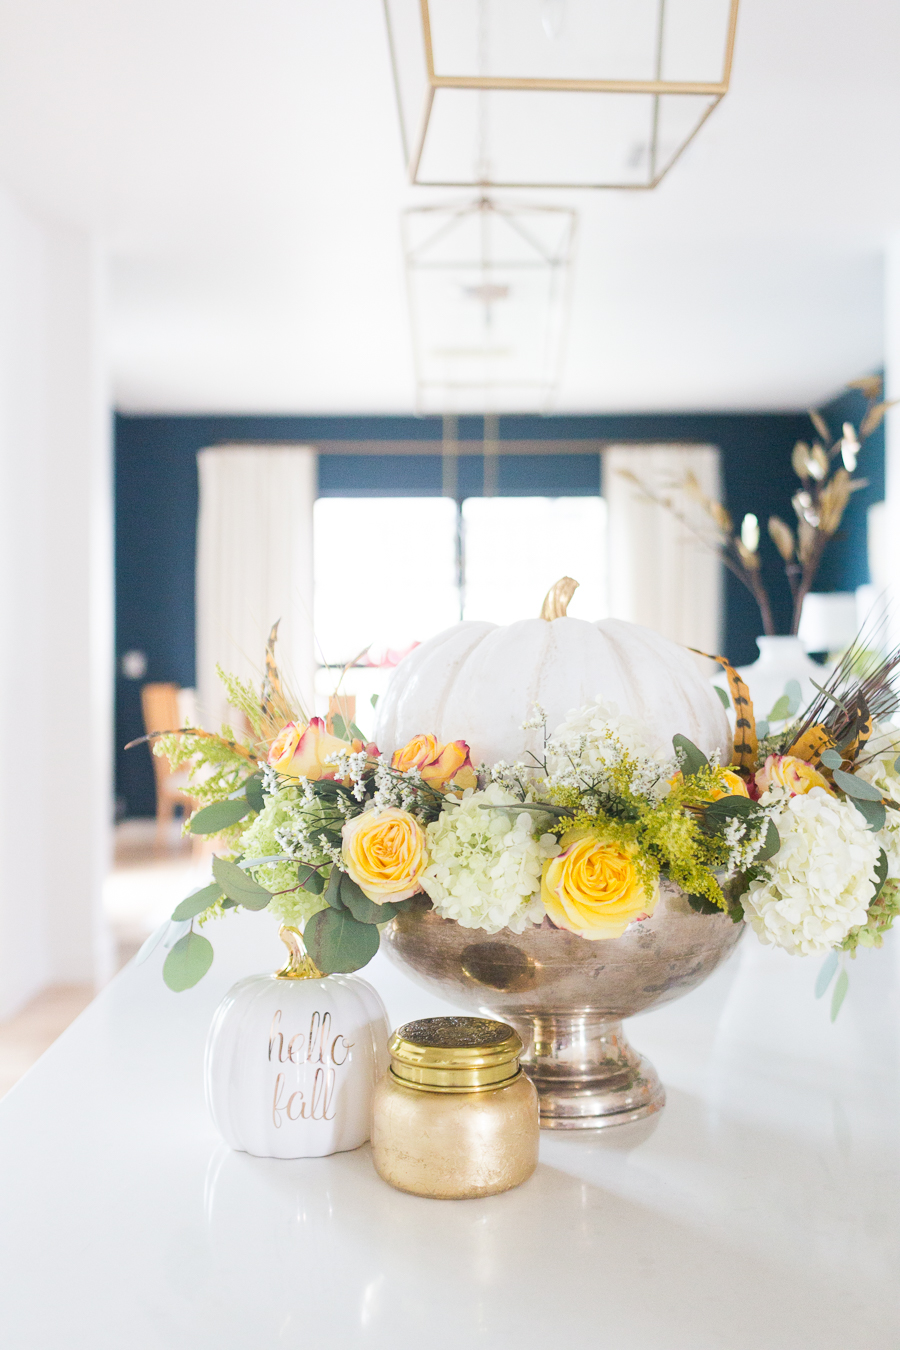 DIY Silver Urn Pumpkin Centerpiece for Fall hydrangeas and eucalyptus and roses inside of a silver urn with a ceramic pumpkin for a Thanksgiving centerpiece sitting beside a fall Anthropologie candle and hello fall pumpkin